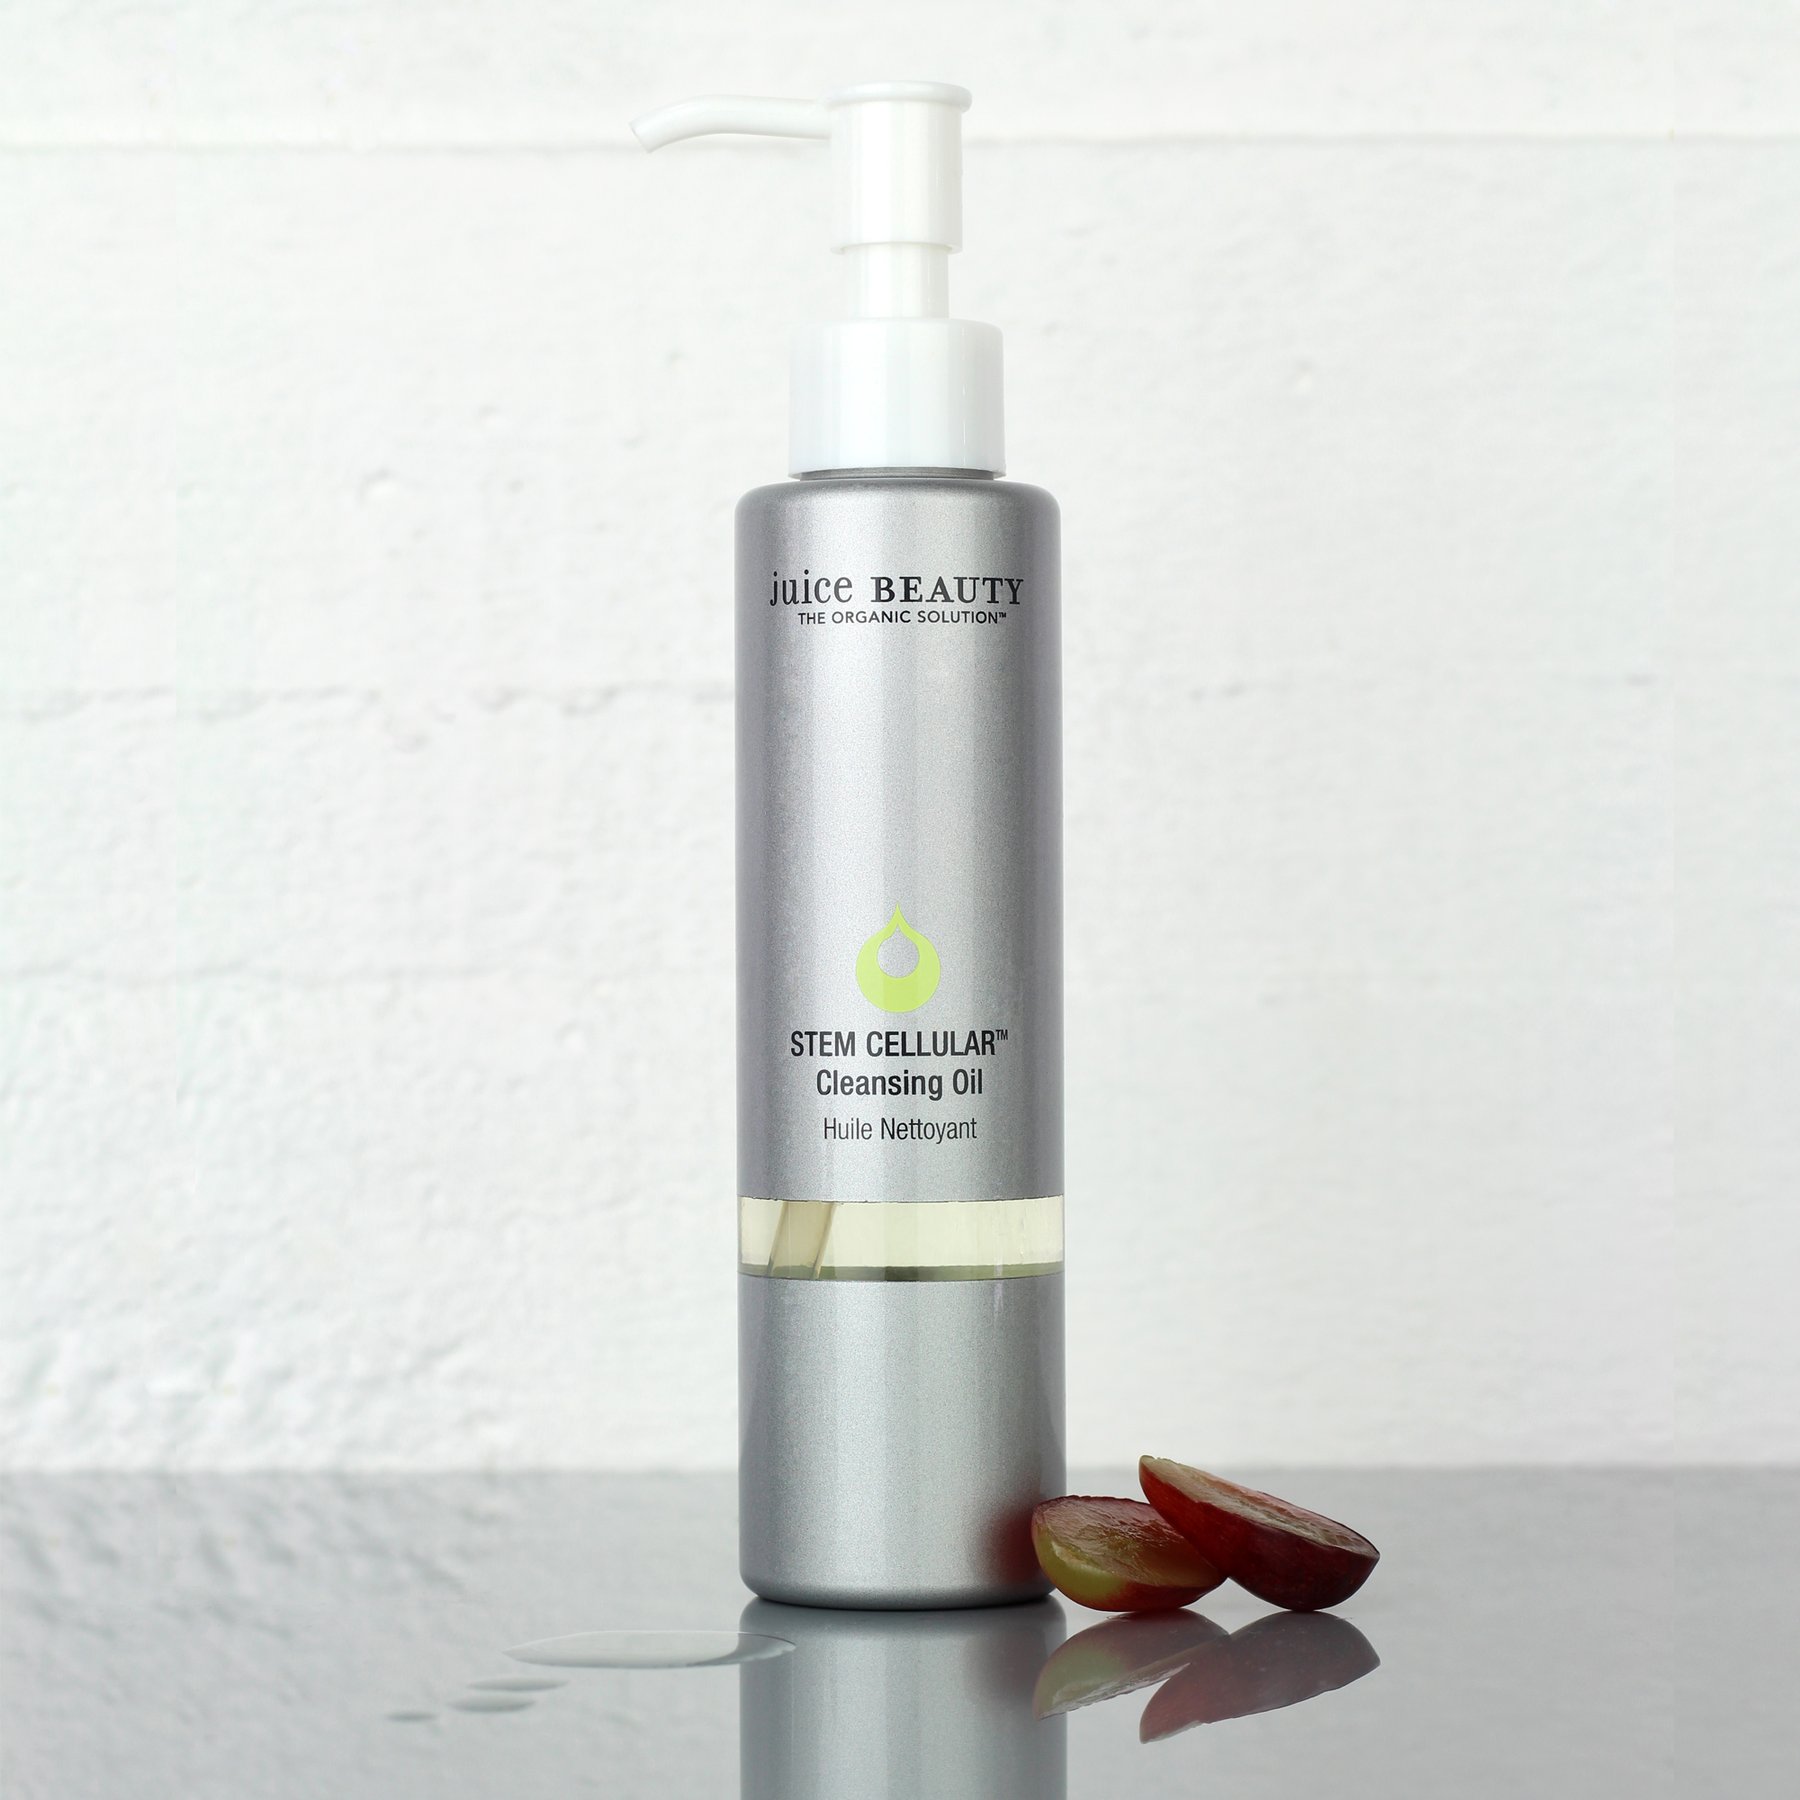 Juice Beauty Steam Cellular Cleansing Oil